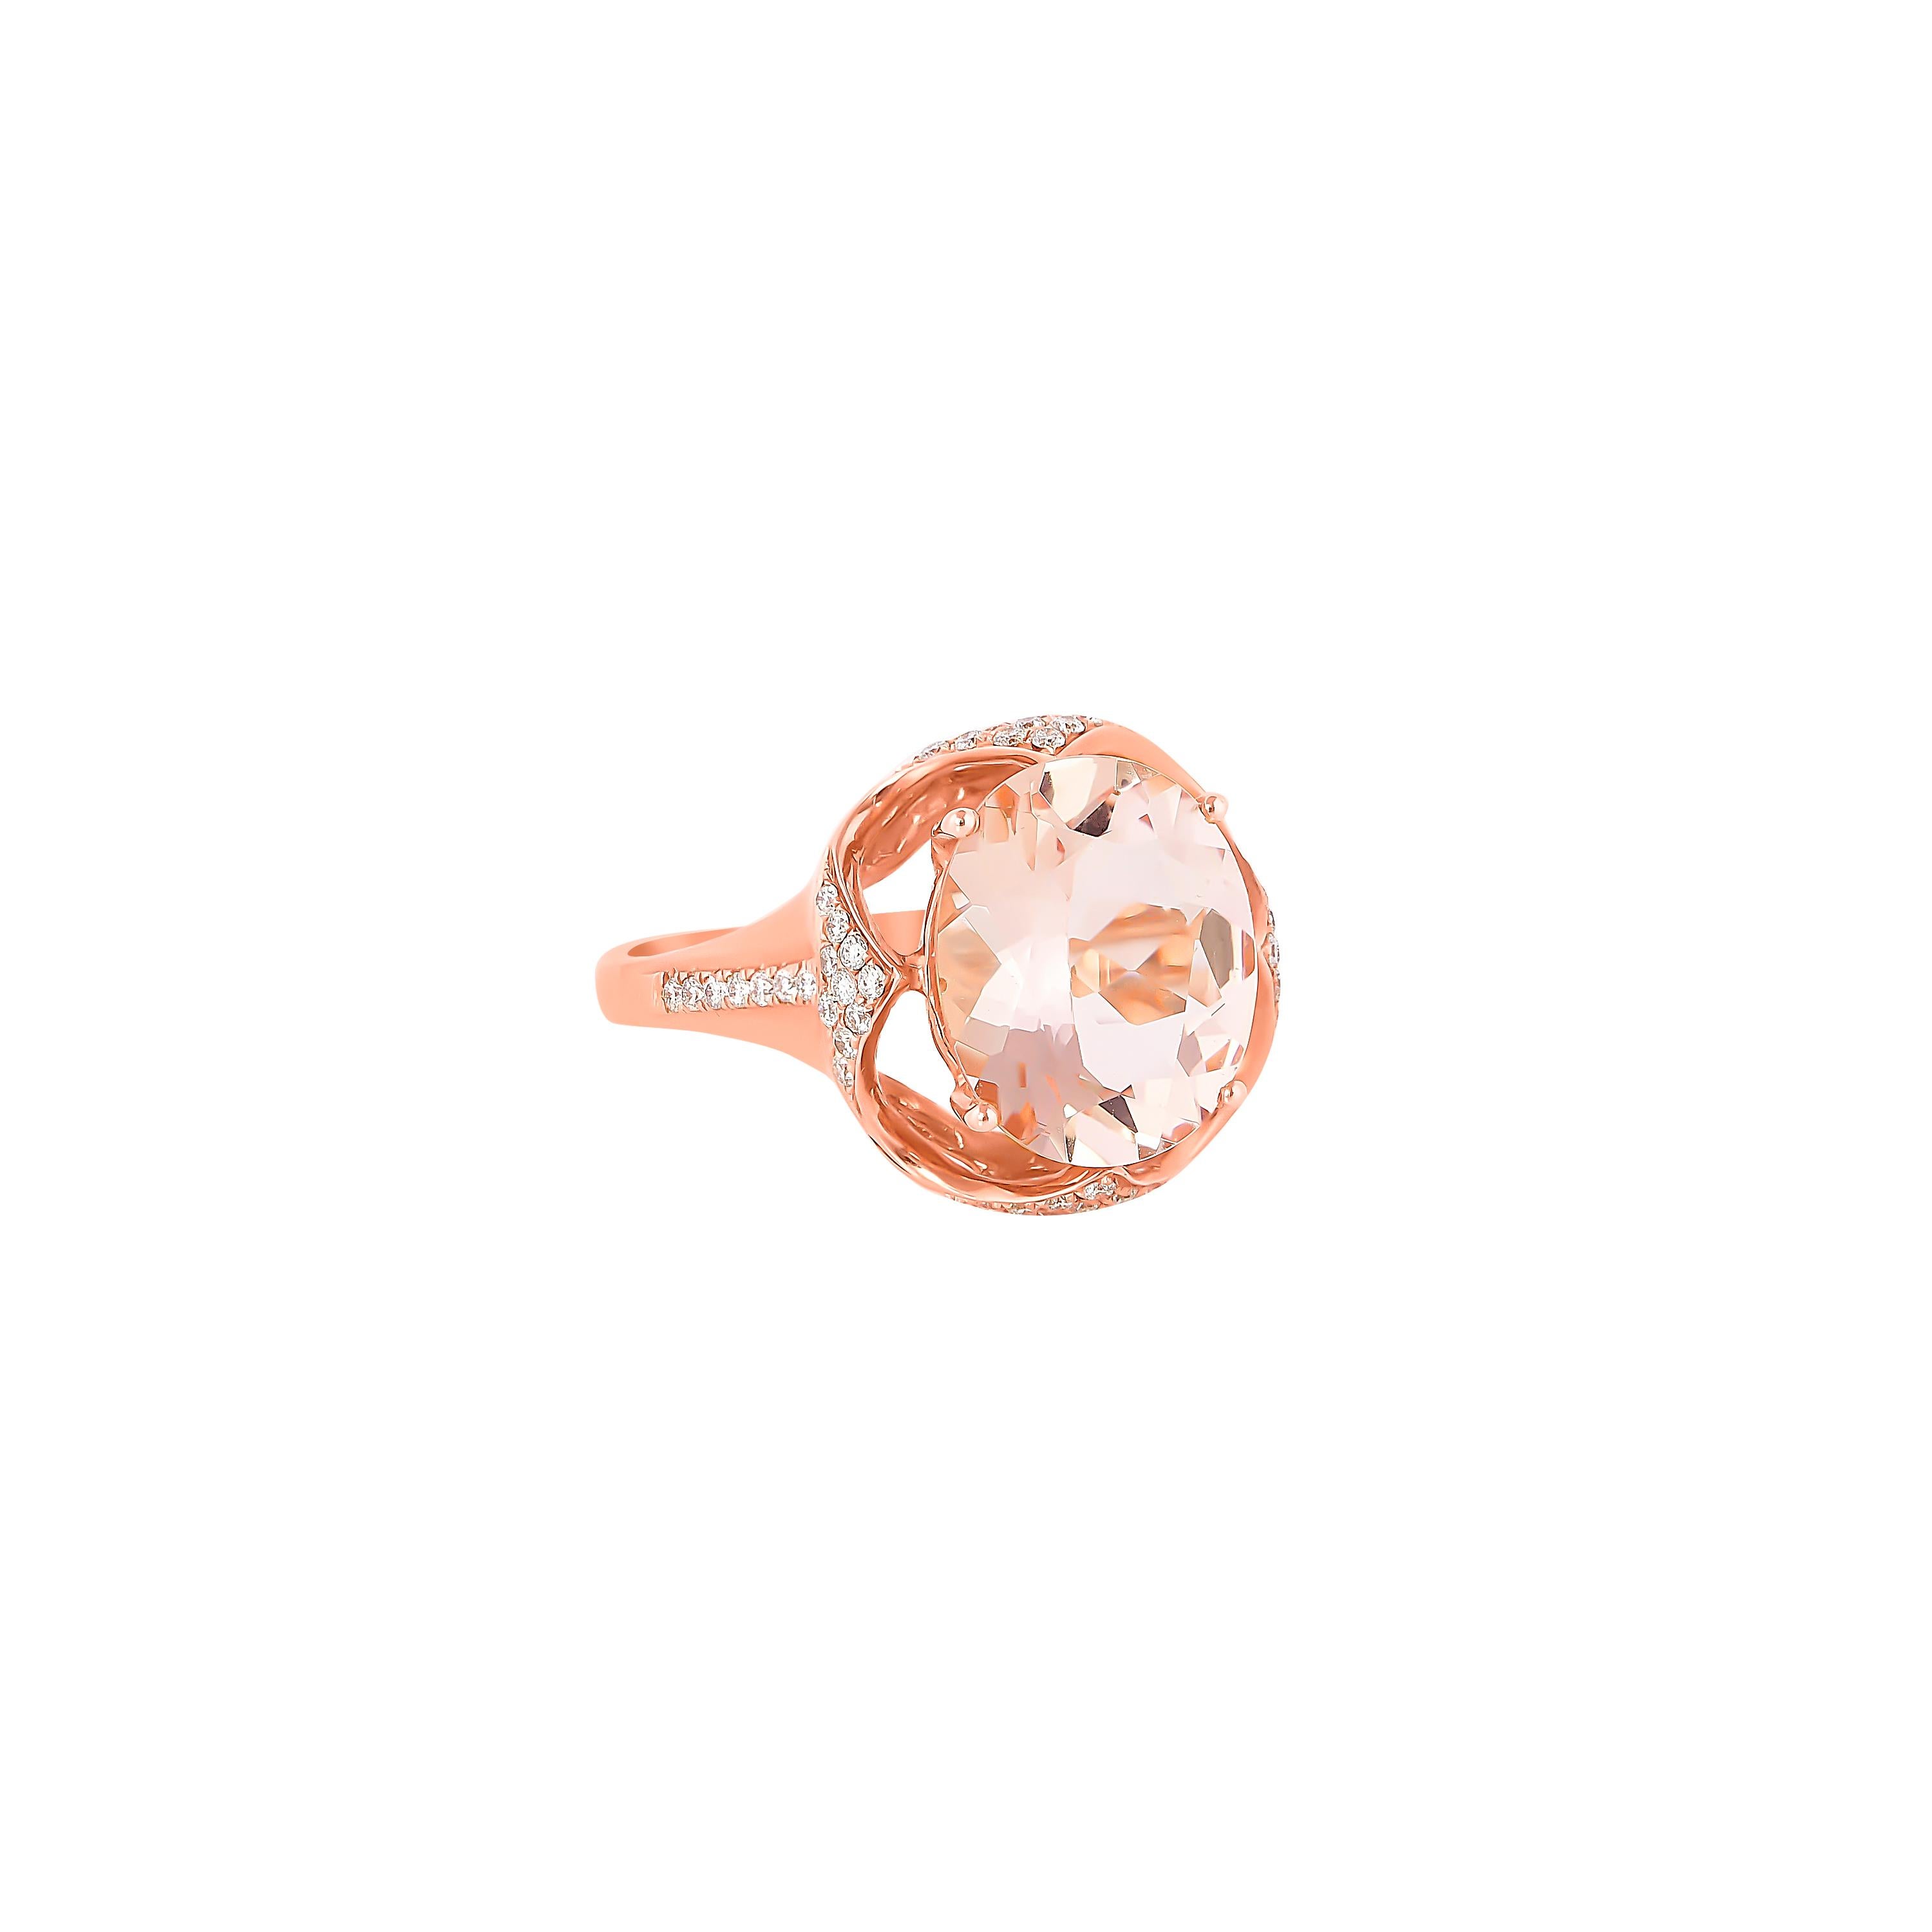 This collection features an array of magnificent morganites! Accented with Diamond these rings are made in rose gold and present a classic yet elegant look. 

Classic morganite ring in 18K Rose gold with Diamond. 

Morganite: 3.61 carat, 12X10mm